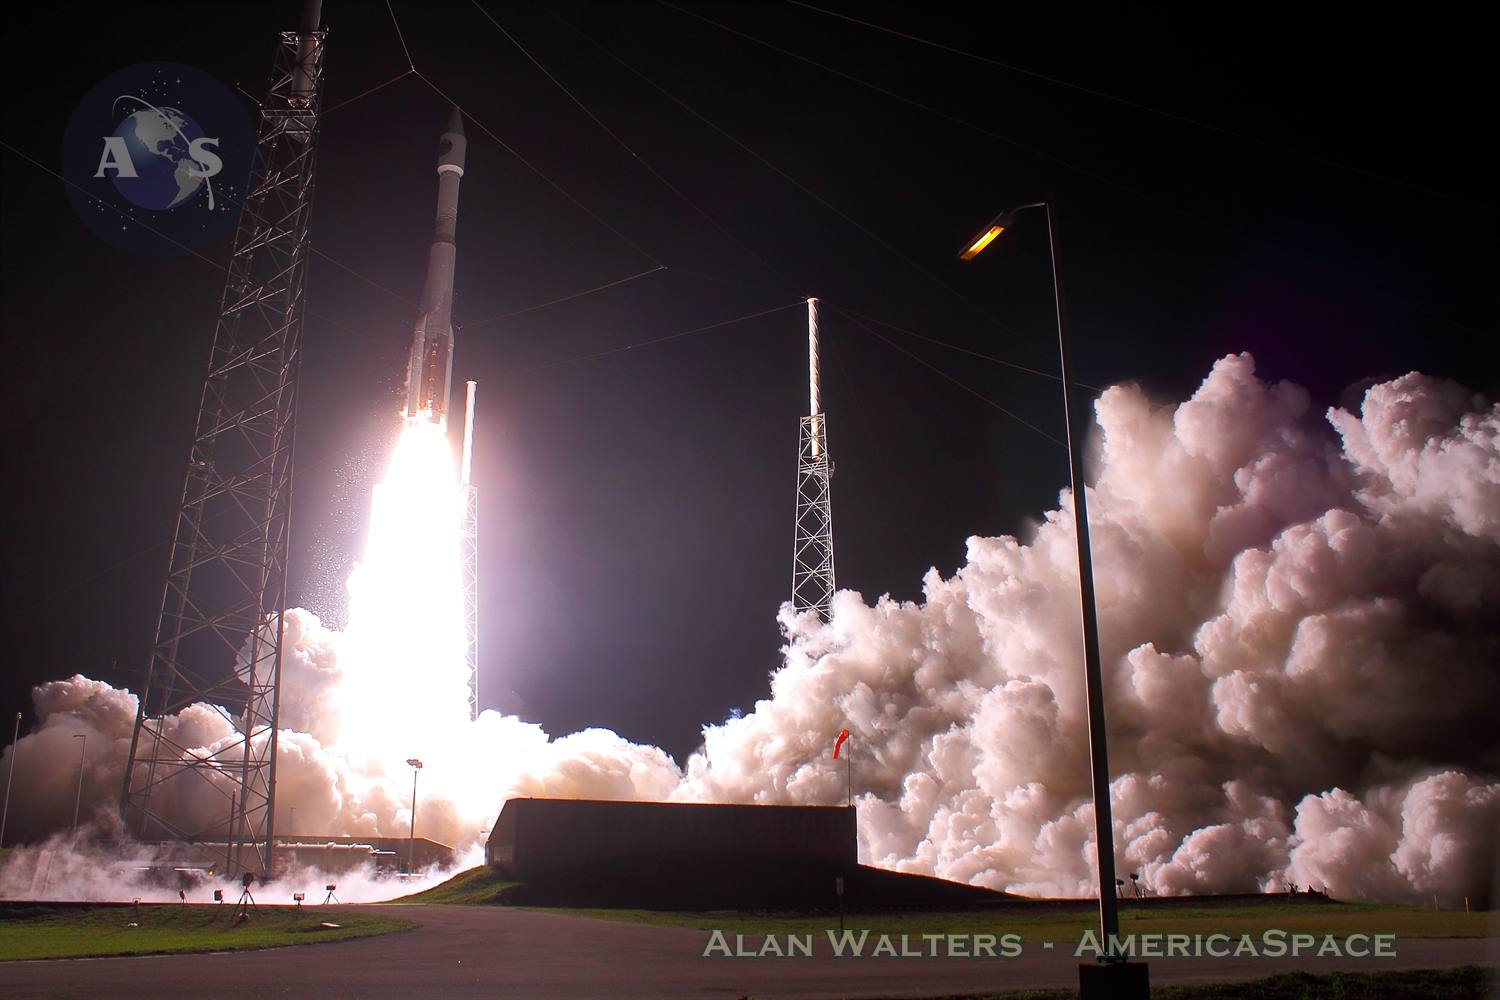 ULA's workhorse booster has been grounded since an engine anomaly occurred on the OA-6 launch, but it is now cleared to return to flight, starting with MUOS-5 as soon as June 24, 2016. Photo Credit: Alan Walters/AmericaSpace